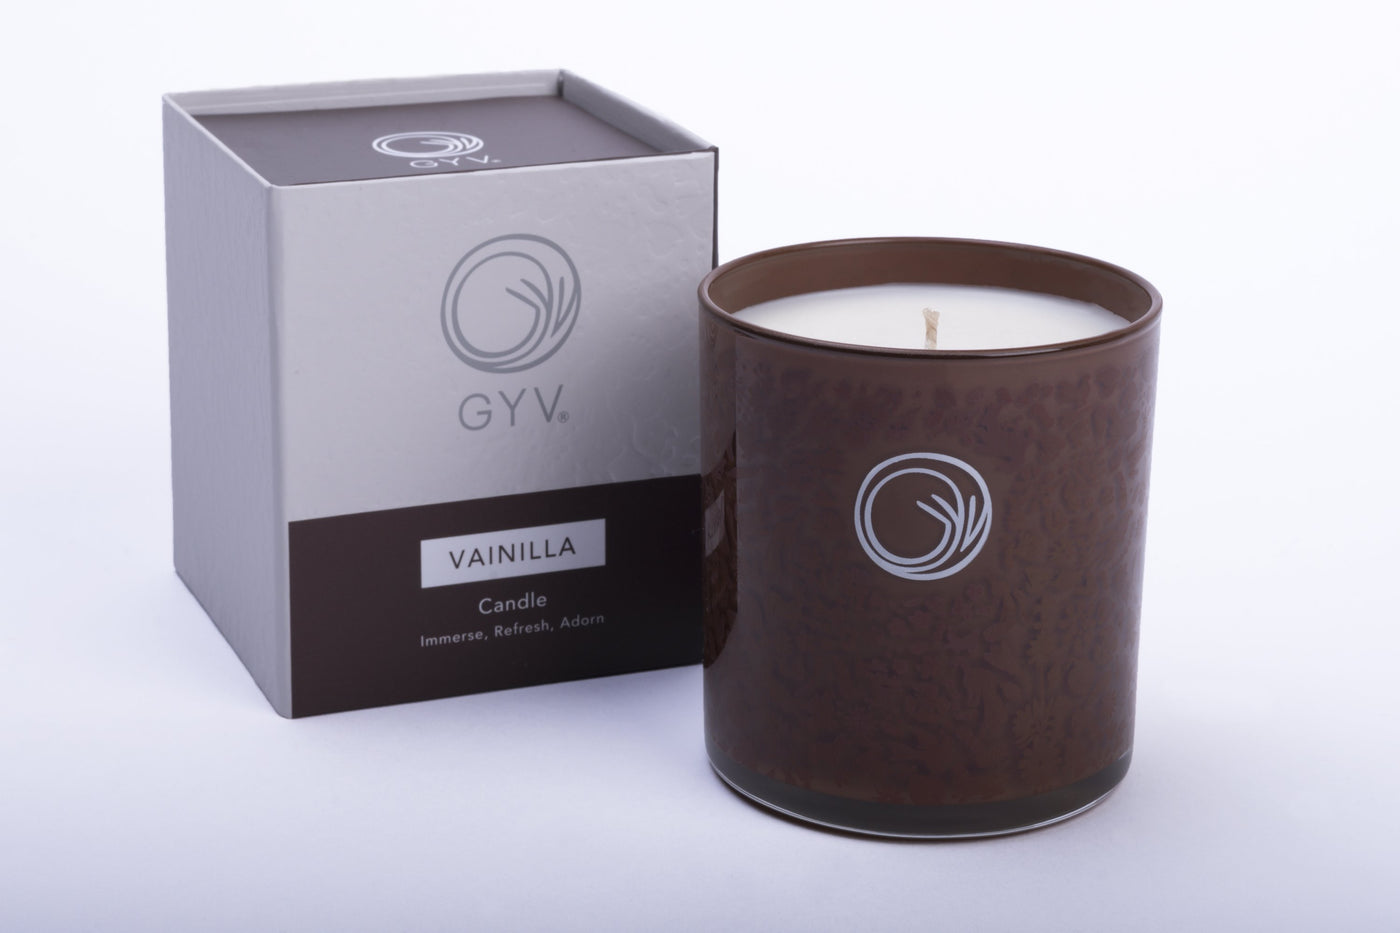 Vainilla Box Candle - Roses & Chains | Fashionable Clothing, Shoes, Accessories, & More